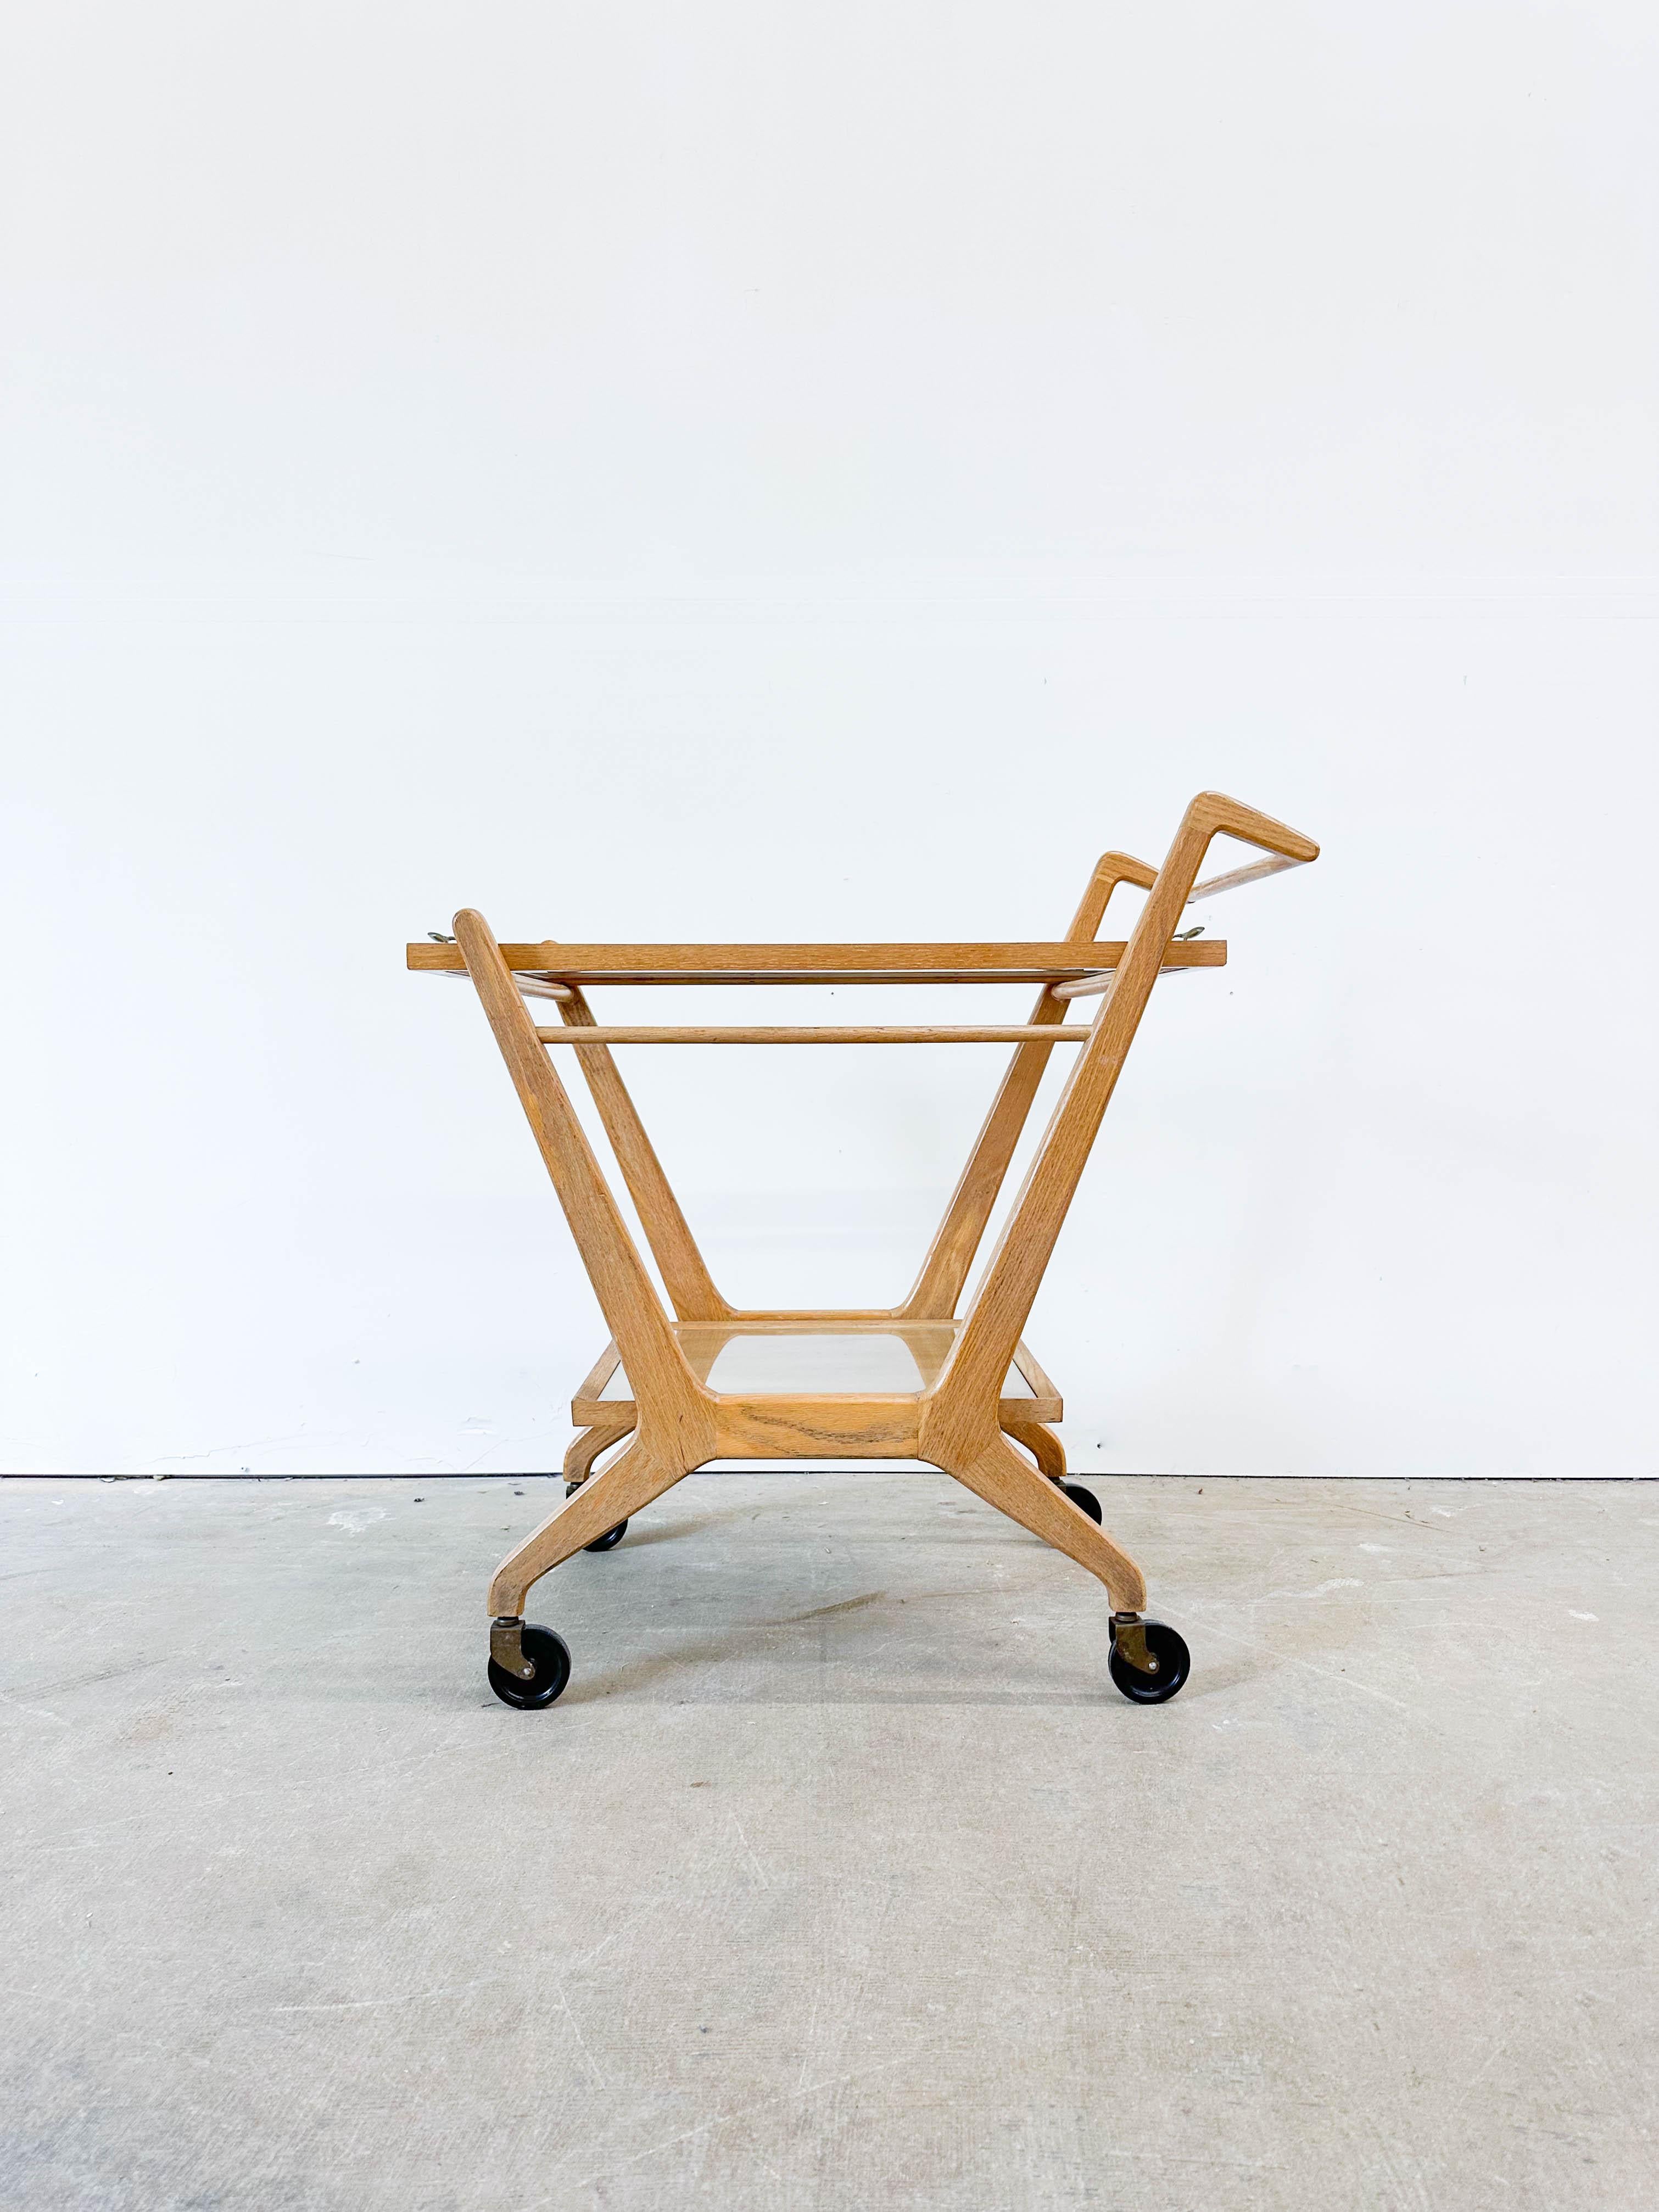 Stylish Italian oak bar or tea cart by Cesare Lacca for Cassina. This practical and beautiful cart reflects the Italian design aesthetic of the 50s with traditional forms being translated into more organic and abstract ones. In very good original